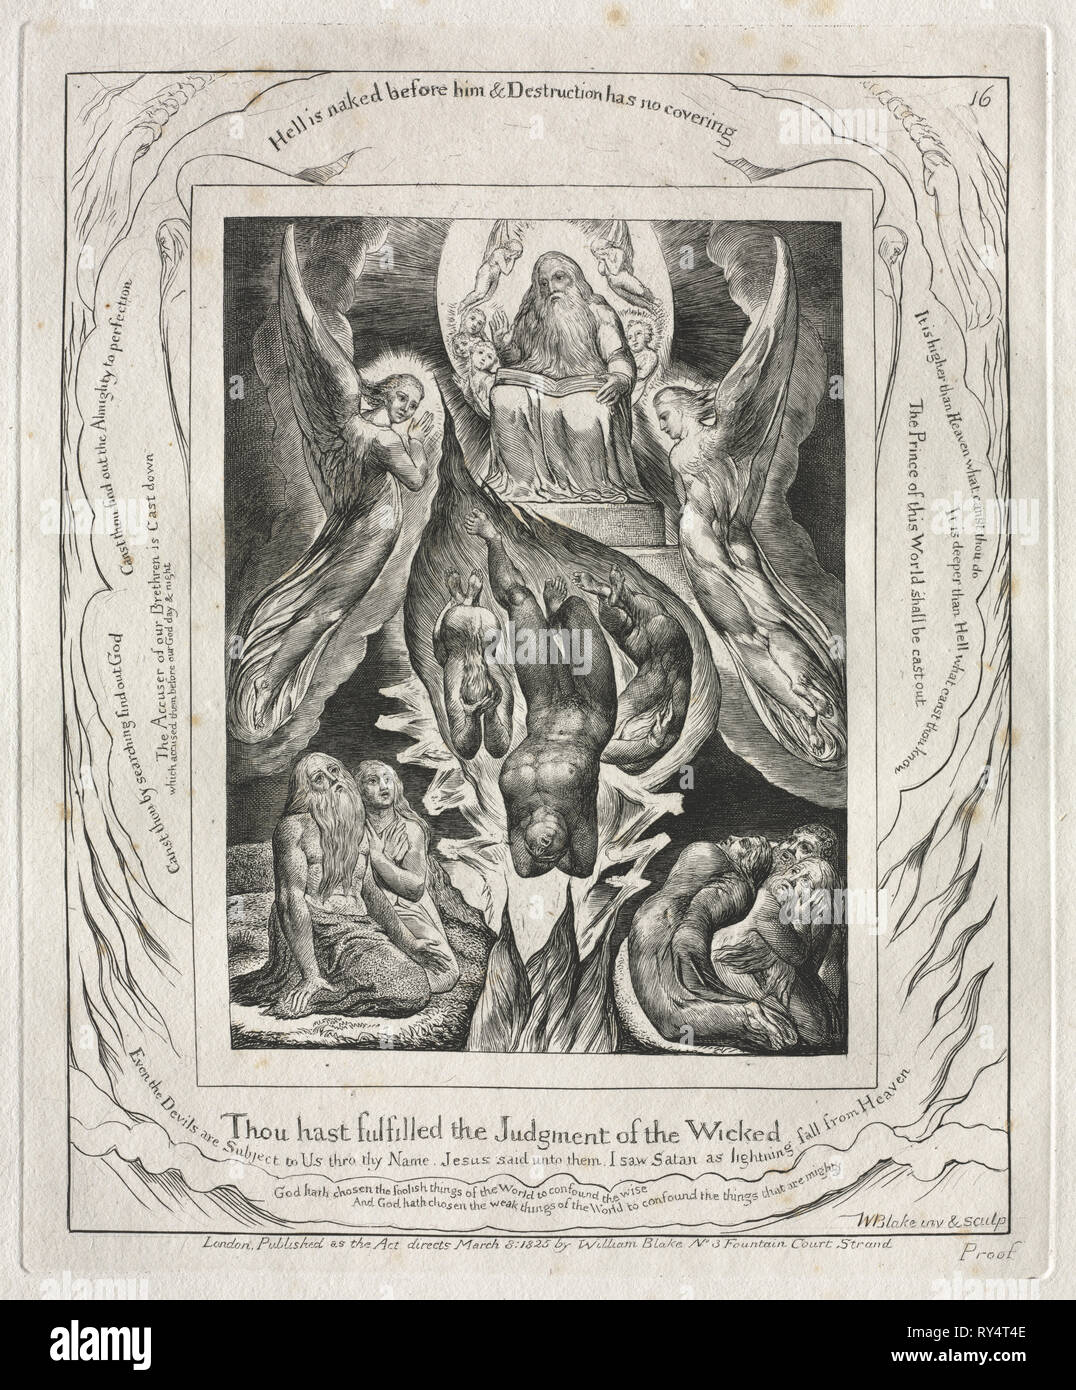 The Book of Job:  Pl. 16, Thou hast fulfilled the Judgment of the Wicked, 1825. William Blake (British, 1757-1827). Engraving Stock Photo